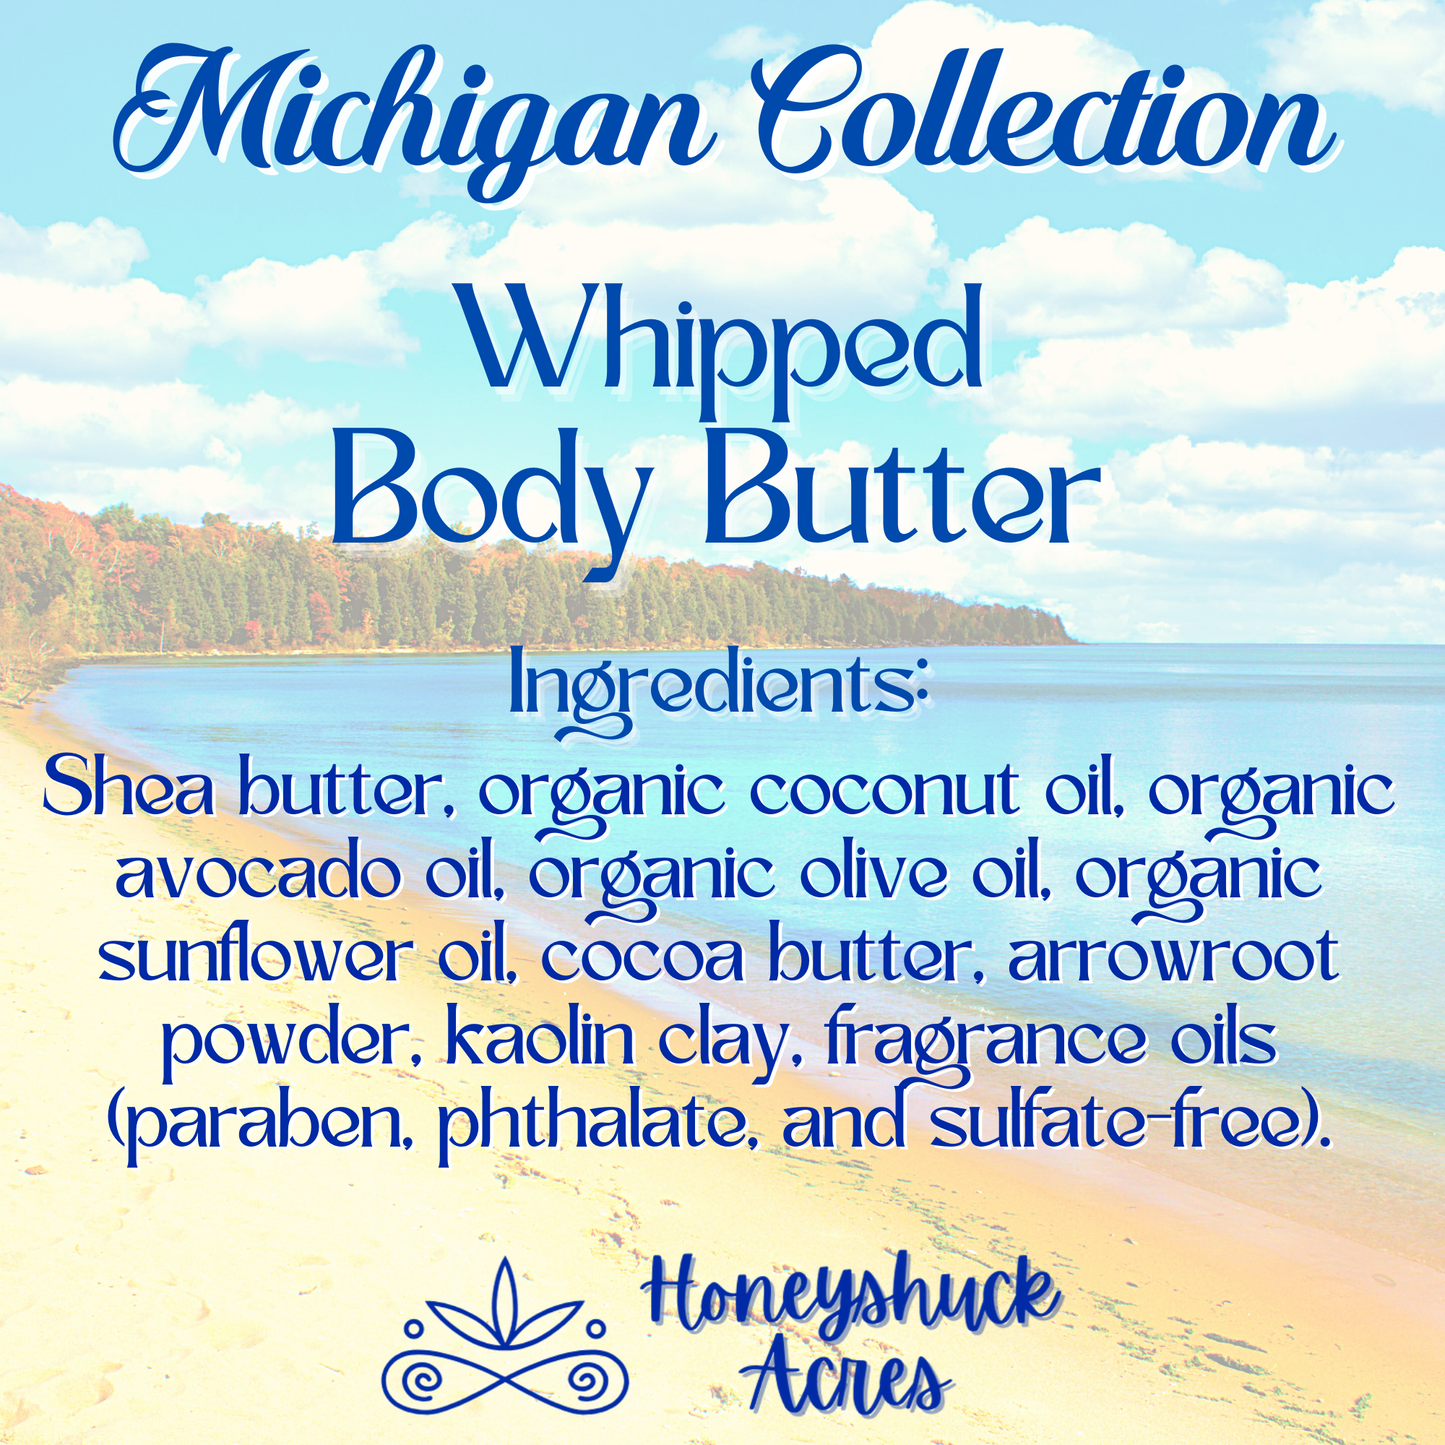 Michigan Whipped Body Butter | Kitch-iti-kipi Inspired Scent | Choice of Size